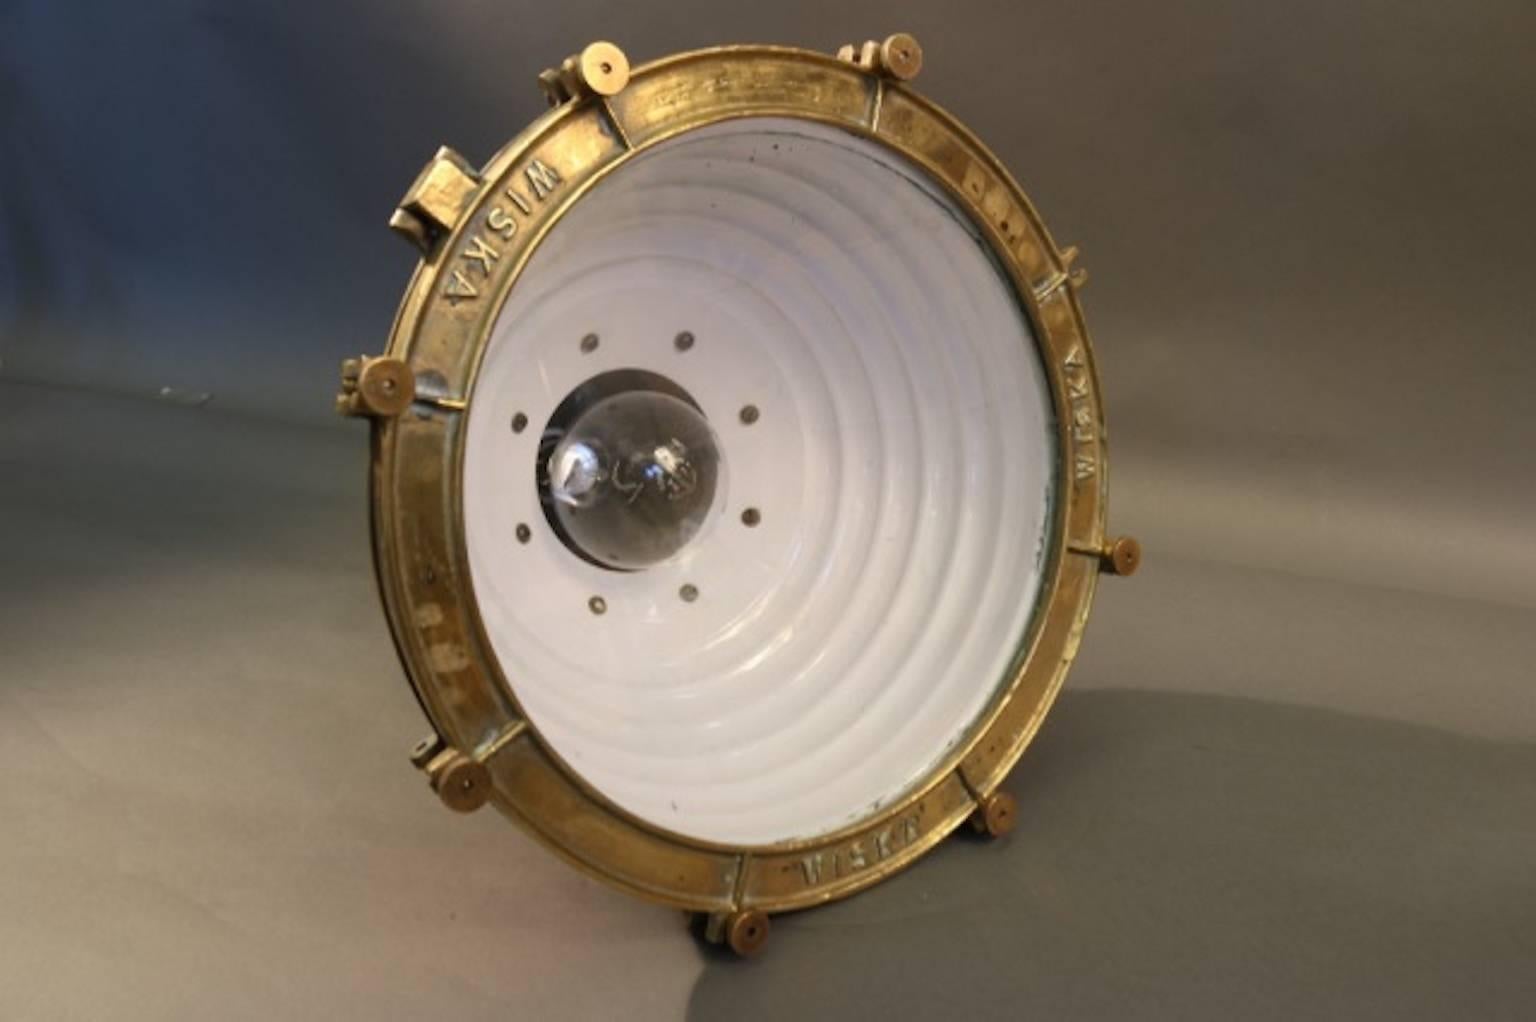 Spun copper ship's cargo light with brass bezel and glass lens. Highly polished and electrified fitted with a hinged mounting bracket.
Dimensions: 23" height x 18" bezel diameter.
Weight: 40lbs.